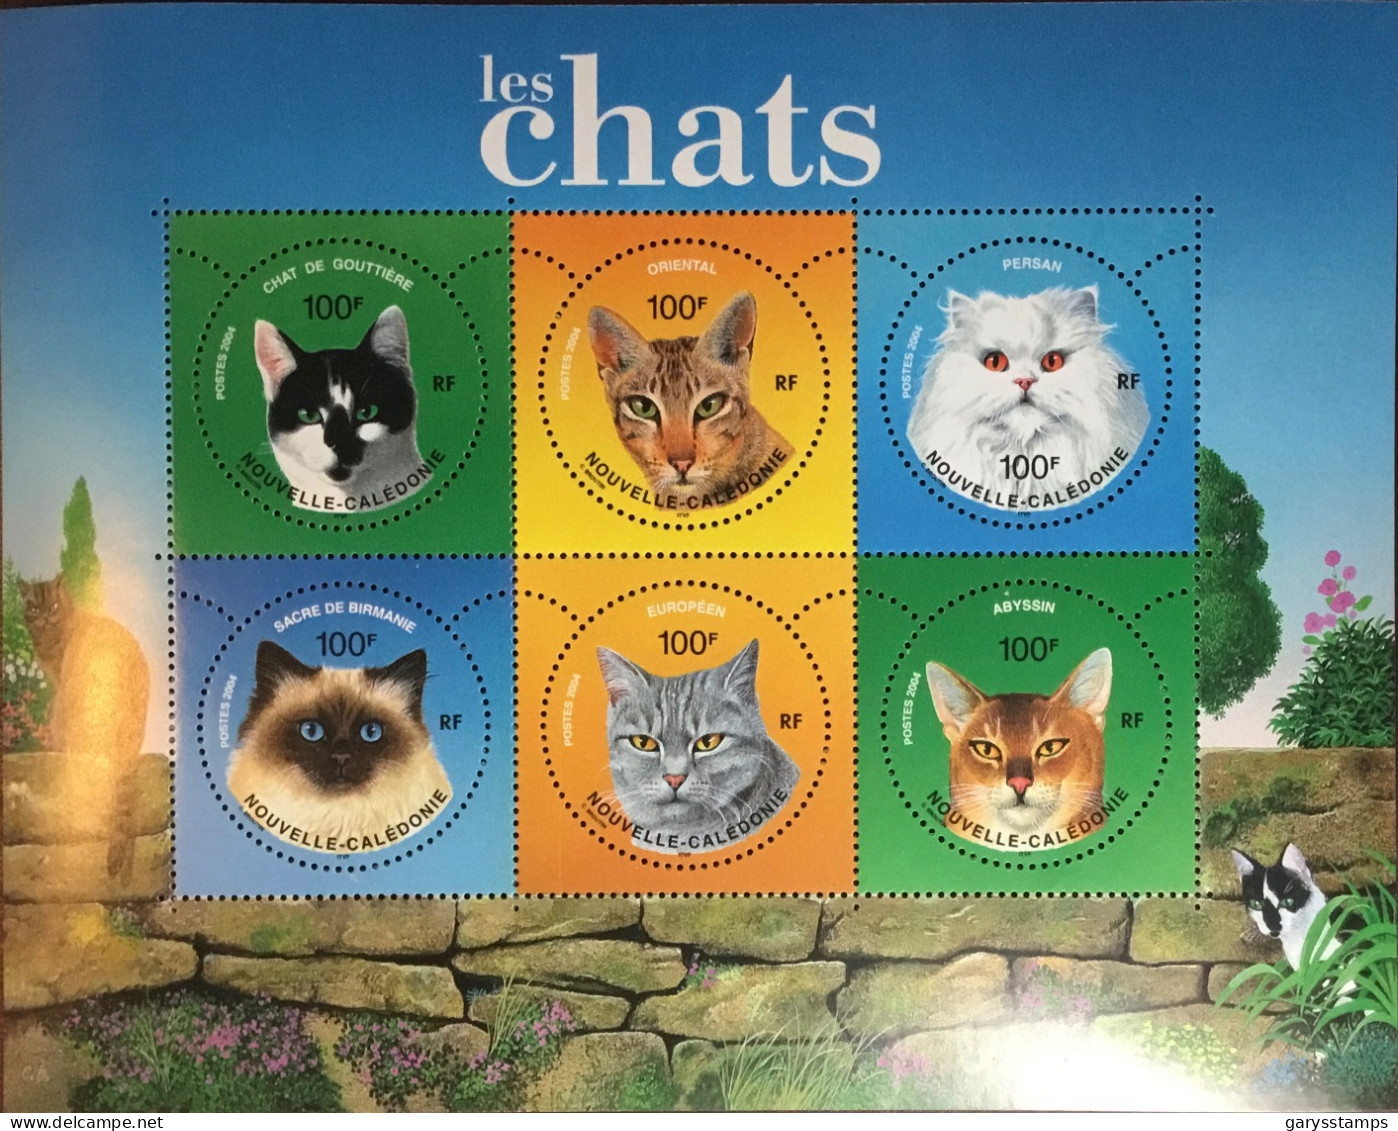 New Caledonia Caledonie 2004 Cats Animals Sheetlet MNH - Chats Domestiques